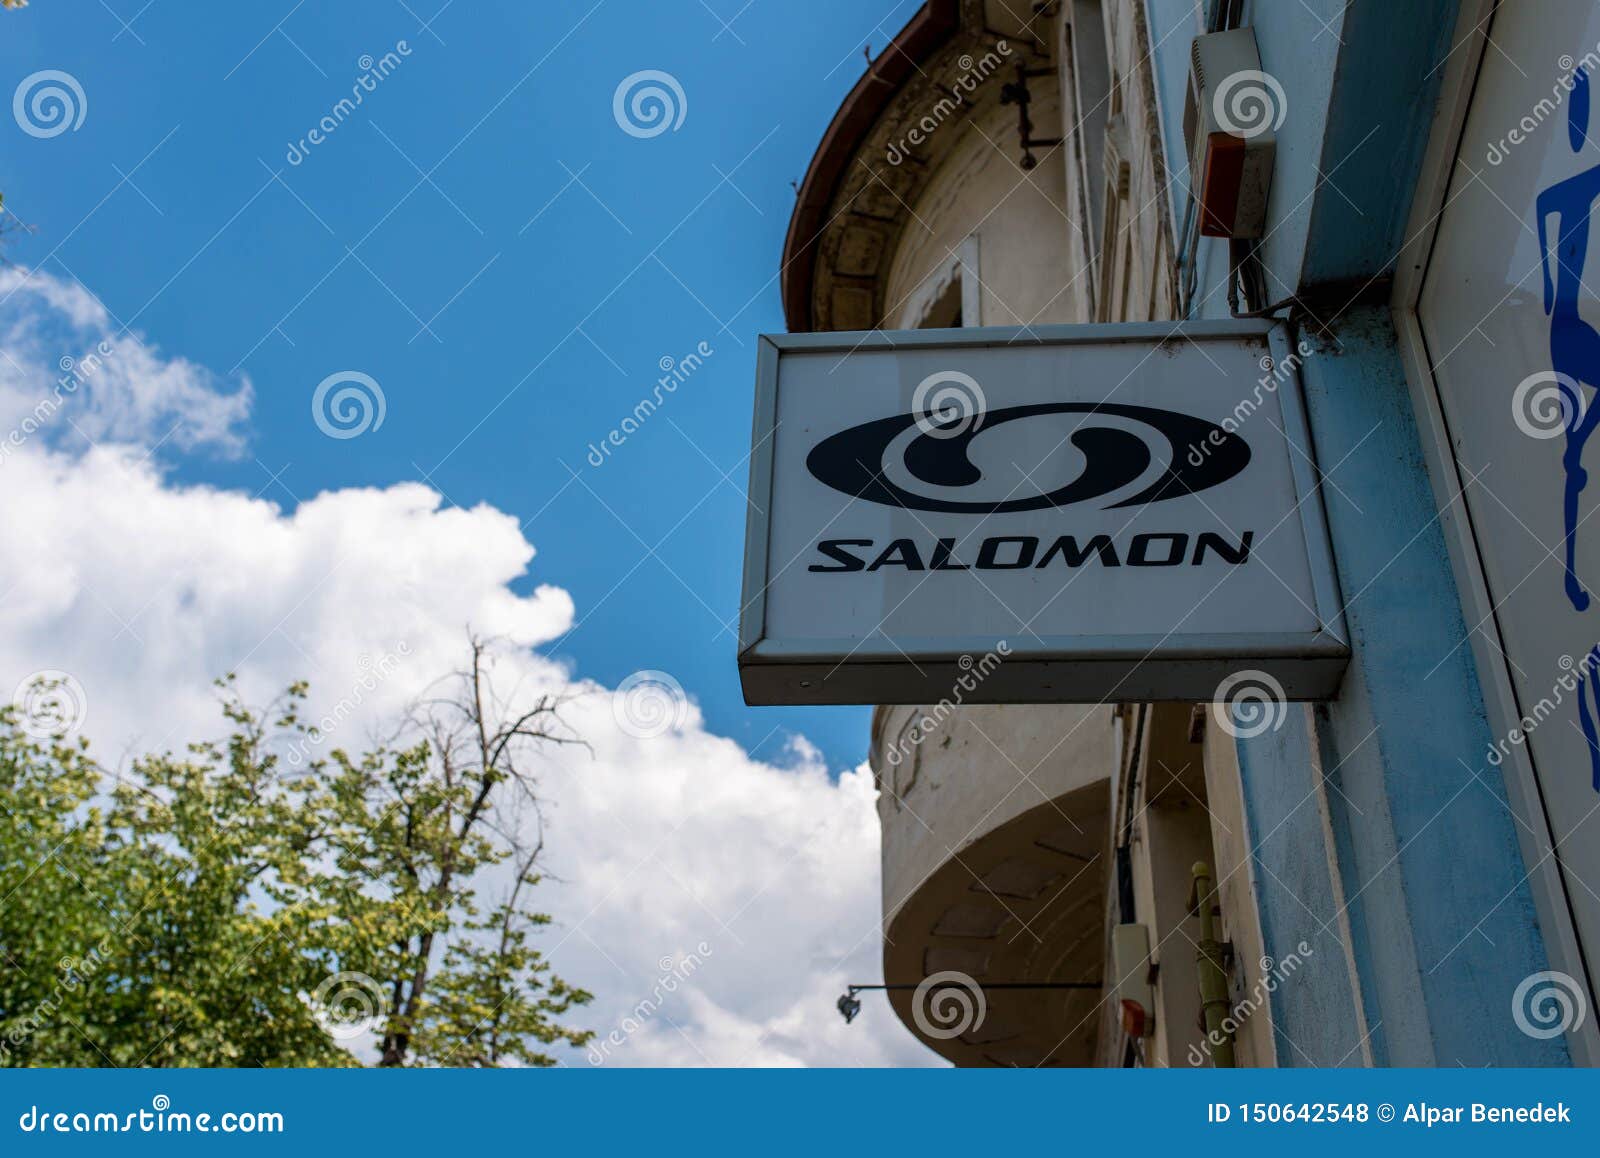 Salomon Business Logo on the Street, Blue Sky with White Clouds Background.  Editorial Stock Photo - Image of famous, june: 150642548